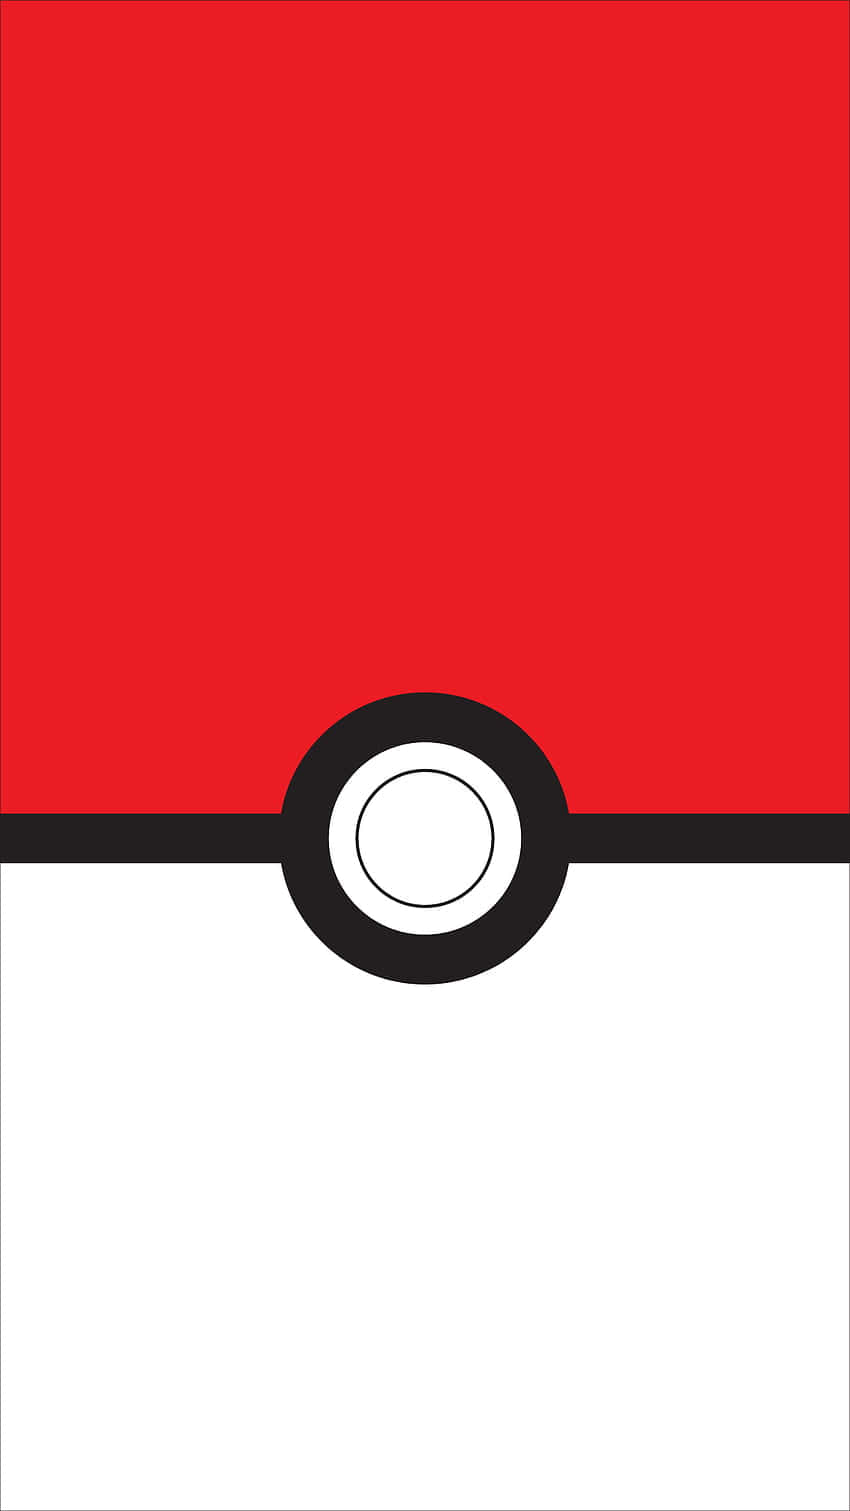 Download Pokeball 850 X 1511 Background | Wallpapers.com